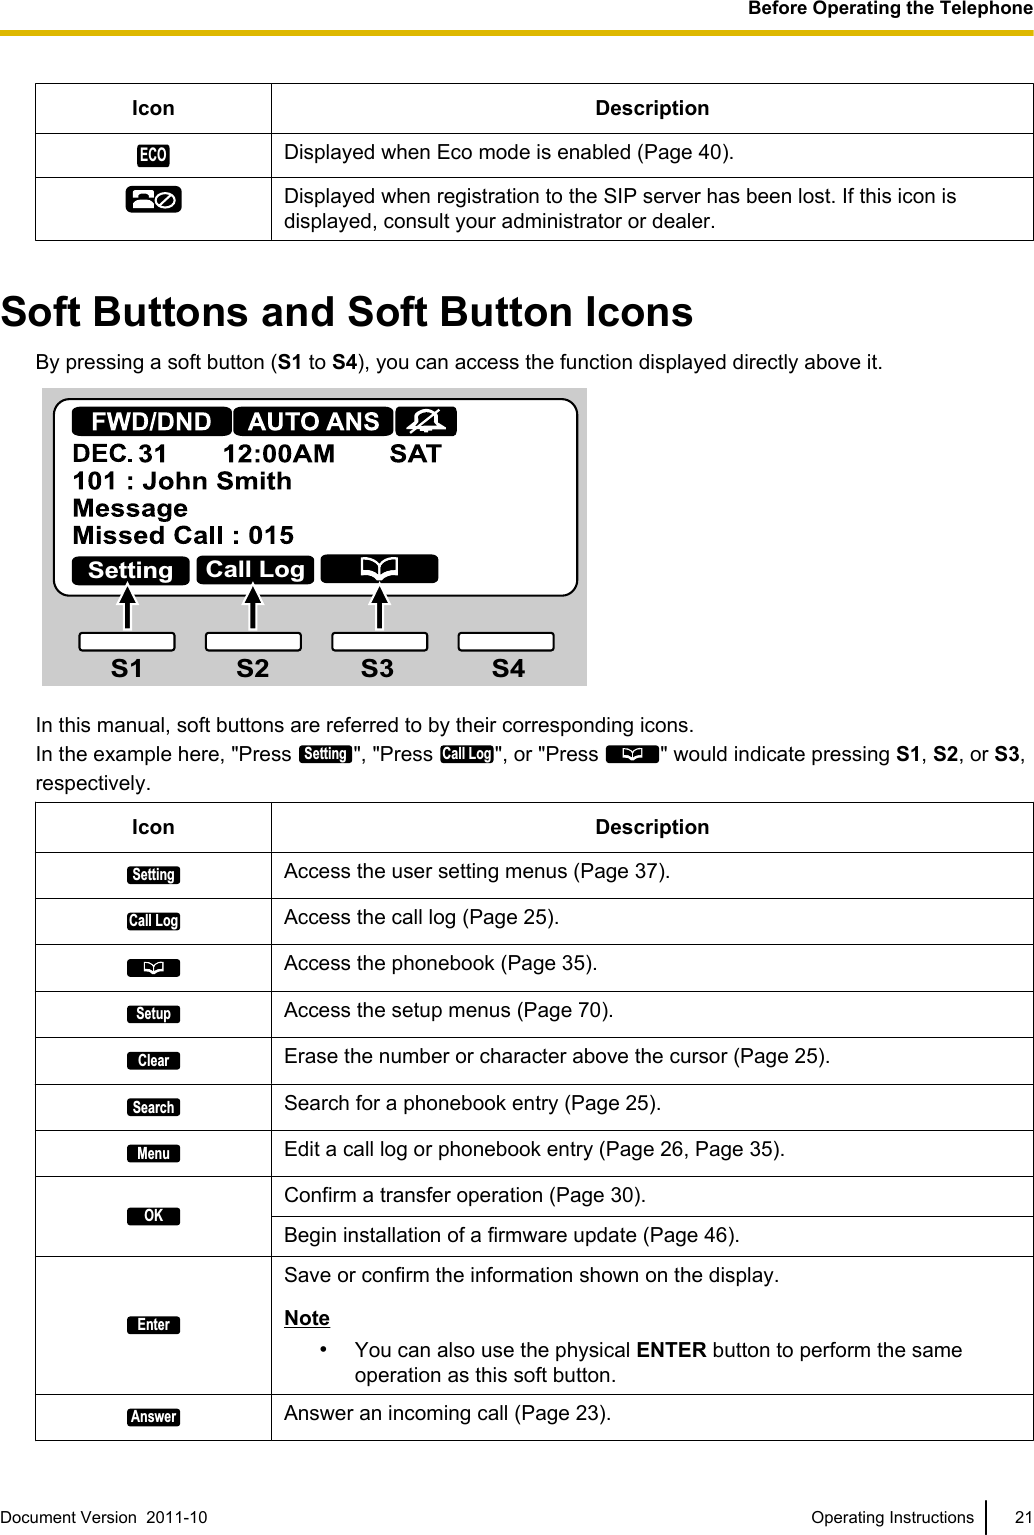 Icon DescriptionECODisplayed when Eco mode is enabled (Page 40).Displayed when registration to the SIP server has been lost. If this icon isdisplayed, consult your administrator or dealer.Soft Buttons and Soft Button IconsBy pressing a soft button (S1 to S4), you can access the function displayed directly above it.Setting Call LogS1 S2 S3 S4In this manual, soft buttons are referred to by their corresponding icons.In the example here, &quot;Press Setting&quot;, &quot;Press Call Log&quot;, or &quot;Press  &quot; would indicate pressing S1, S2, or S3,respectively.Icon DescriptionSettingAccess the user setting menus (Page 37).Call LogAccess the call log (Page 25).Access the phonebook (Page 35).SetupAccess the setup menus (Page 70).ClearErase the number or character above the cursor (Page 25).SearchSearch for a phonebook entry (Page 25).MenuEdit a call log or phonebook entry (Page 26, Page 35).OKConfirm a transfer operation (Page 30).Begin installation of a firmware update (Page 46).EnterSave or confirm the information shown on the display.Note•You can also use the physical ENTER button to perform the sameoperation as this soft button.AnswerAnswer an incoming call (Page 23).Document Version  2011-10   Operating Instructions 21Before Operating the Telephone